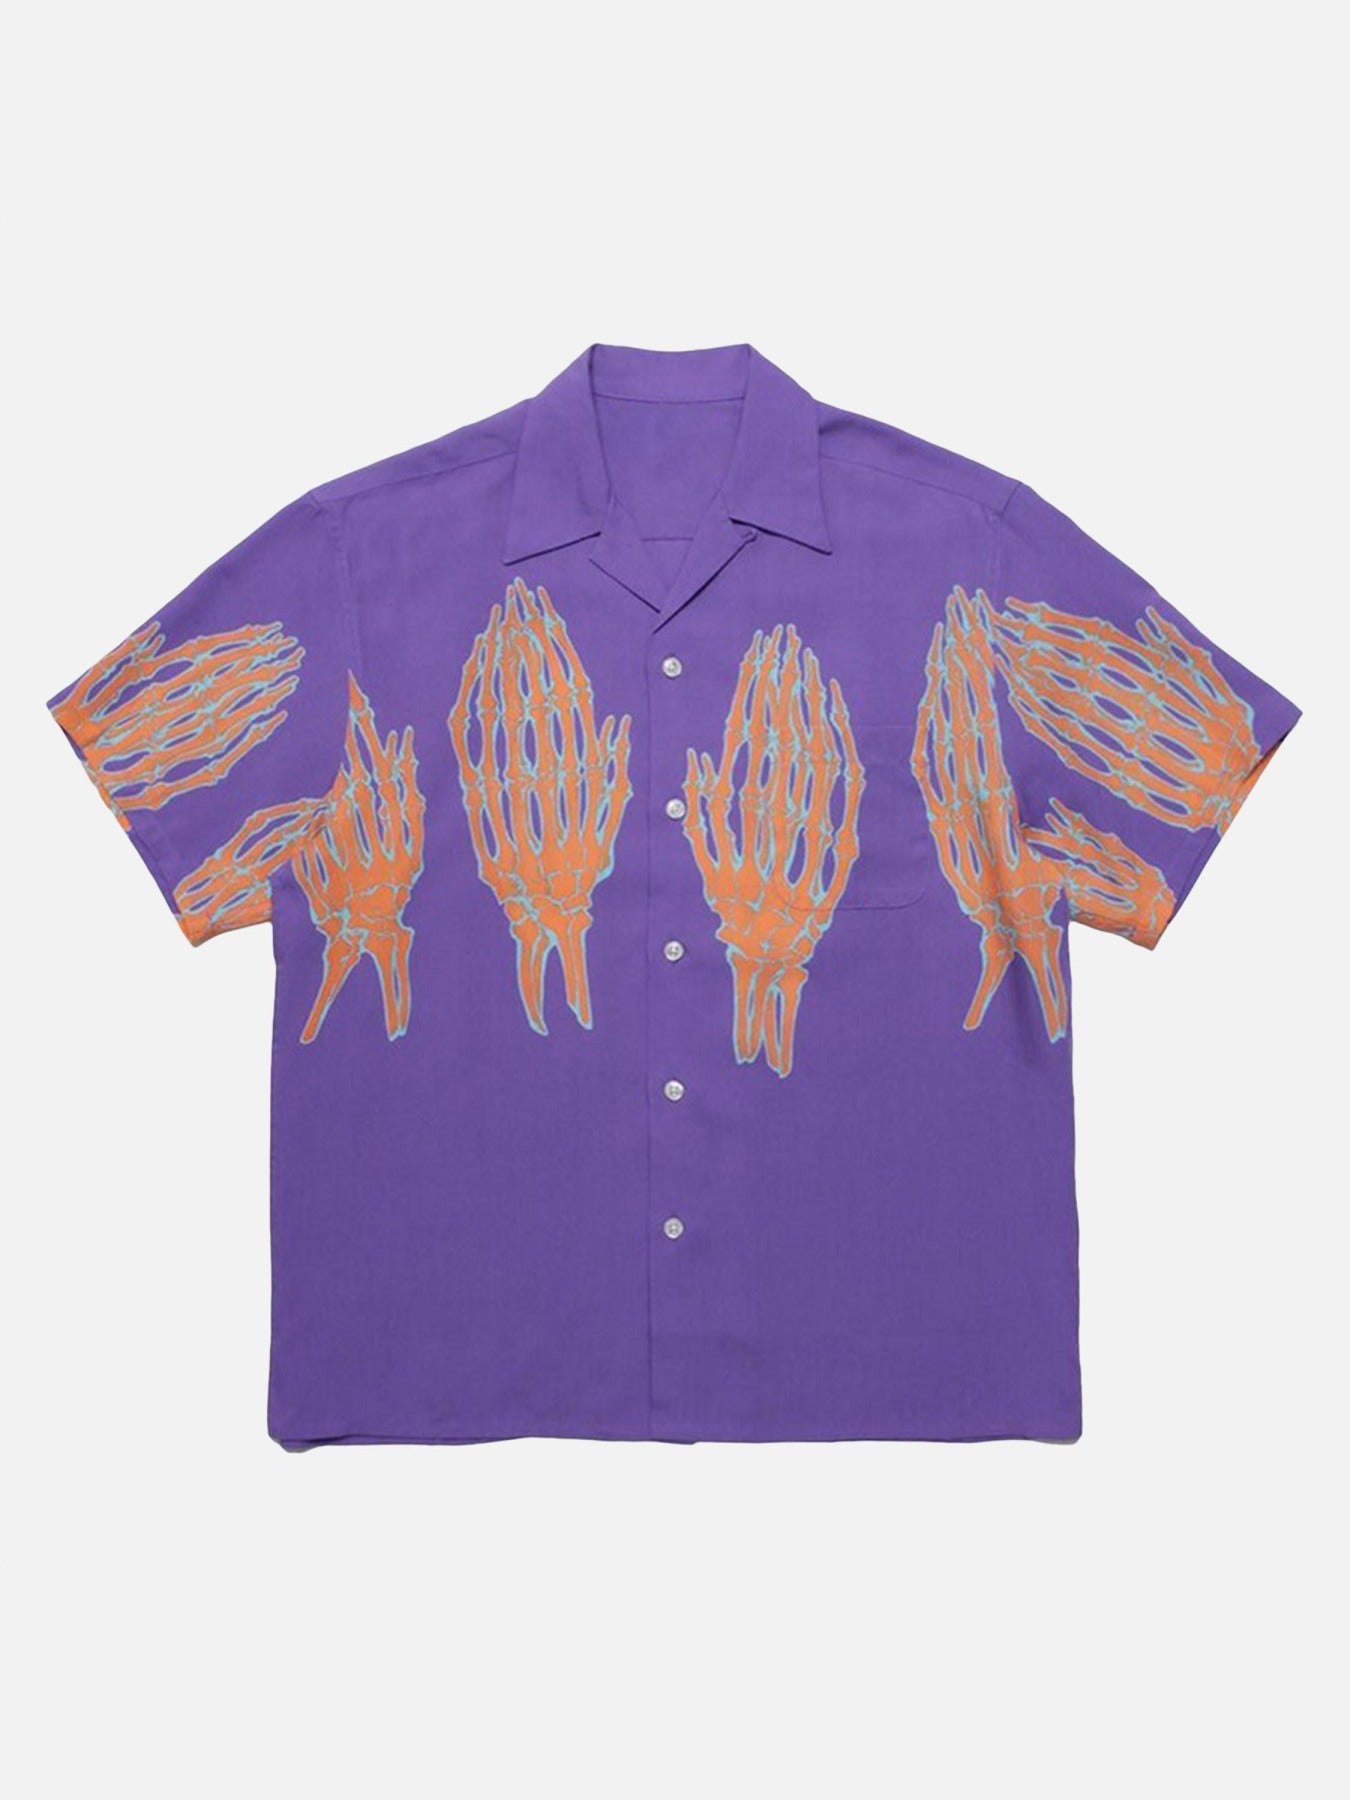 The Supermade Ghost Hand Ghost Claw Casual Print Shirt